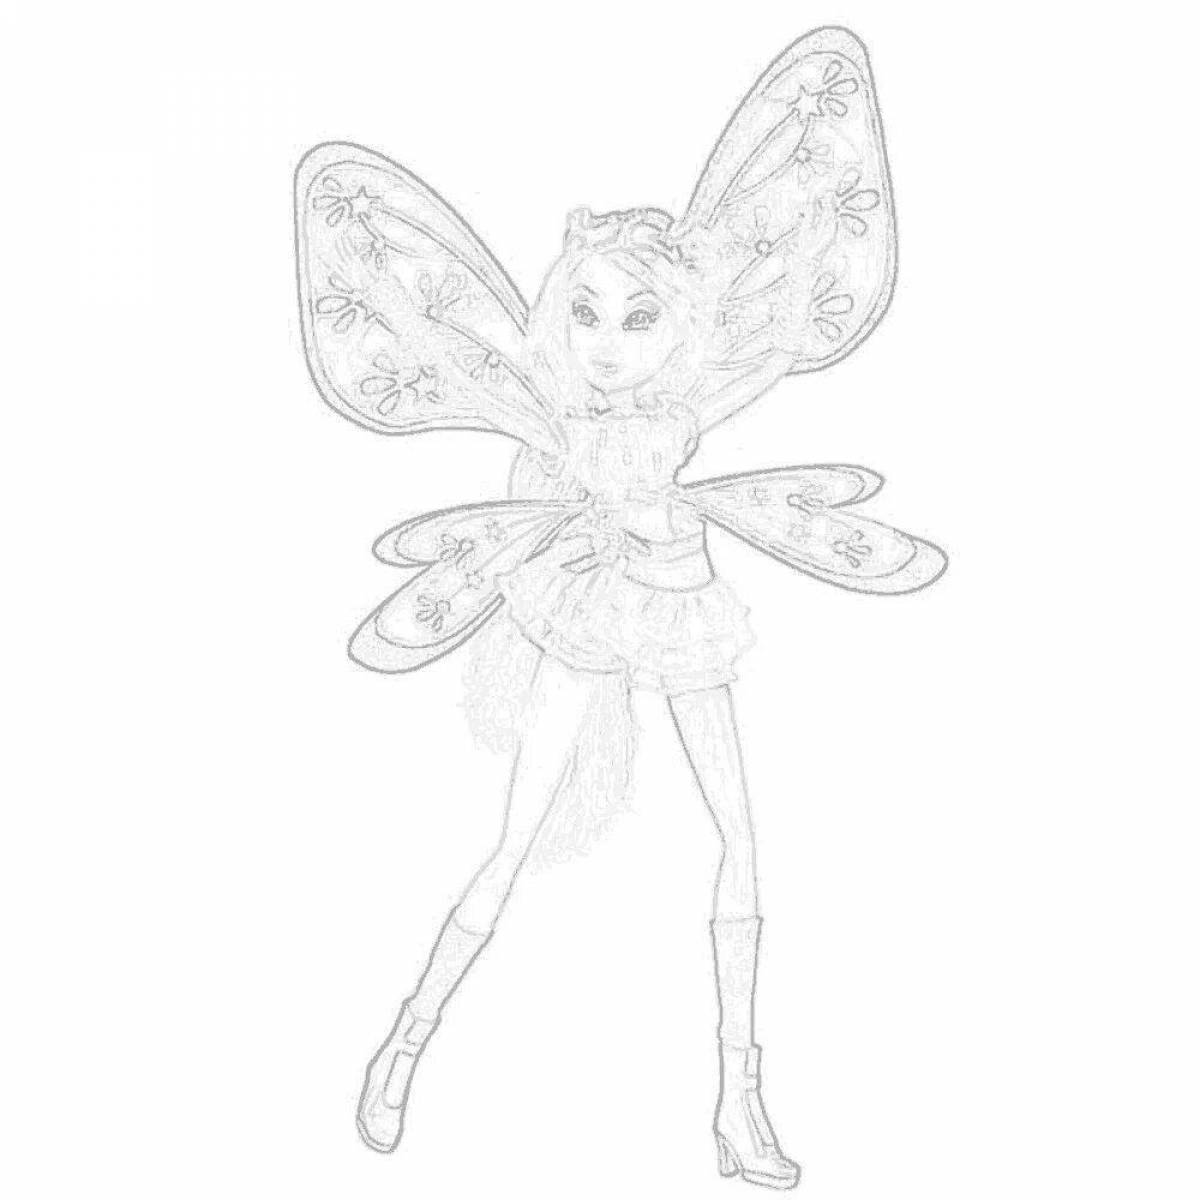 Charming winx doll coloring